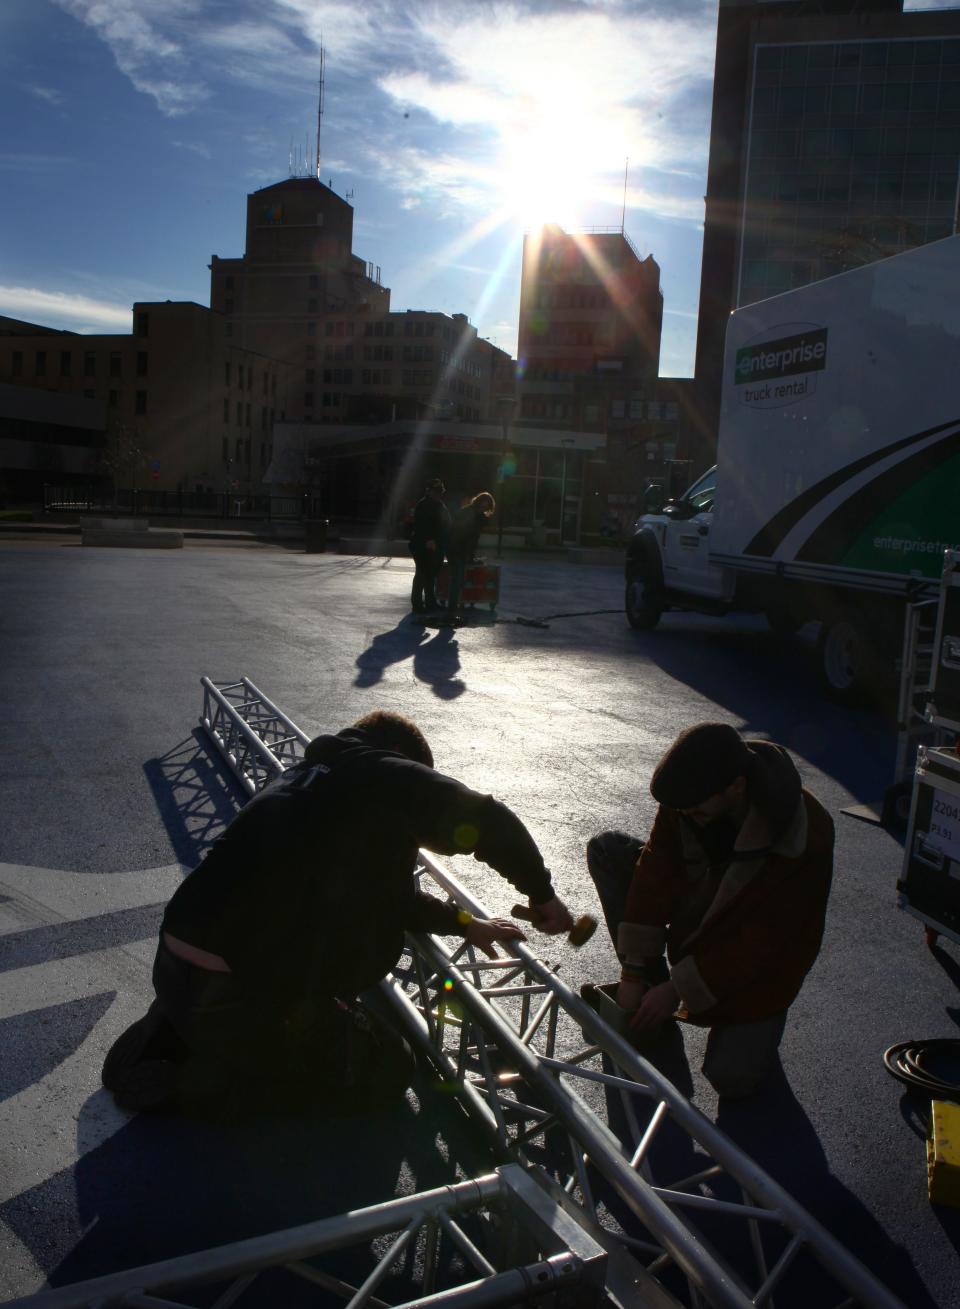 Under full sun, Creighton Lowe and Zach Werner, of Hamilton AV, work to install a video screen on Parcel 5 Monday morning. The 16X9 foot screen will be used to stream the solar eclipse later in the day.